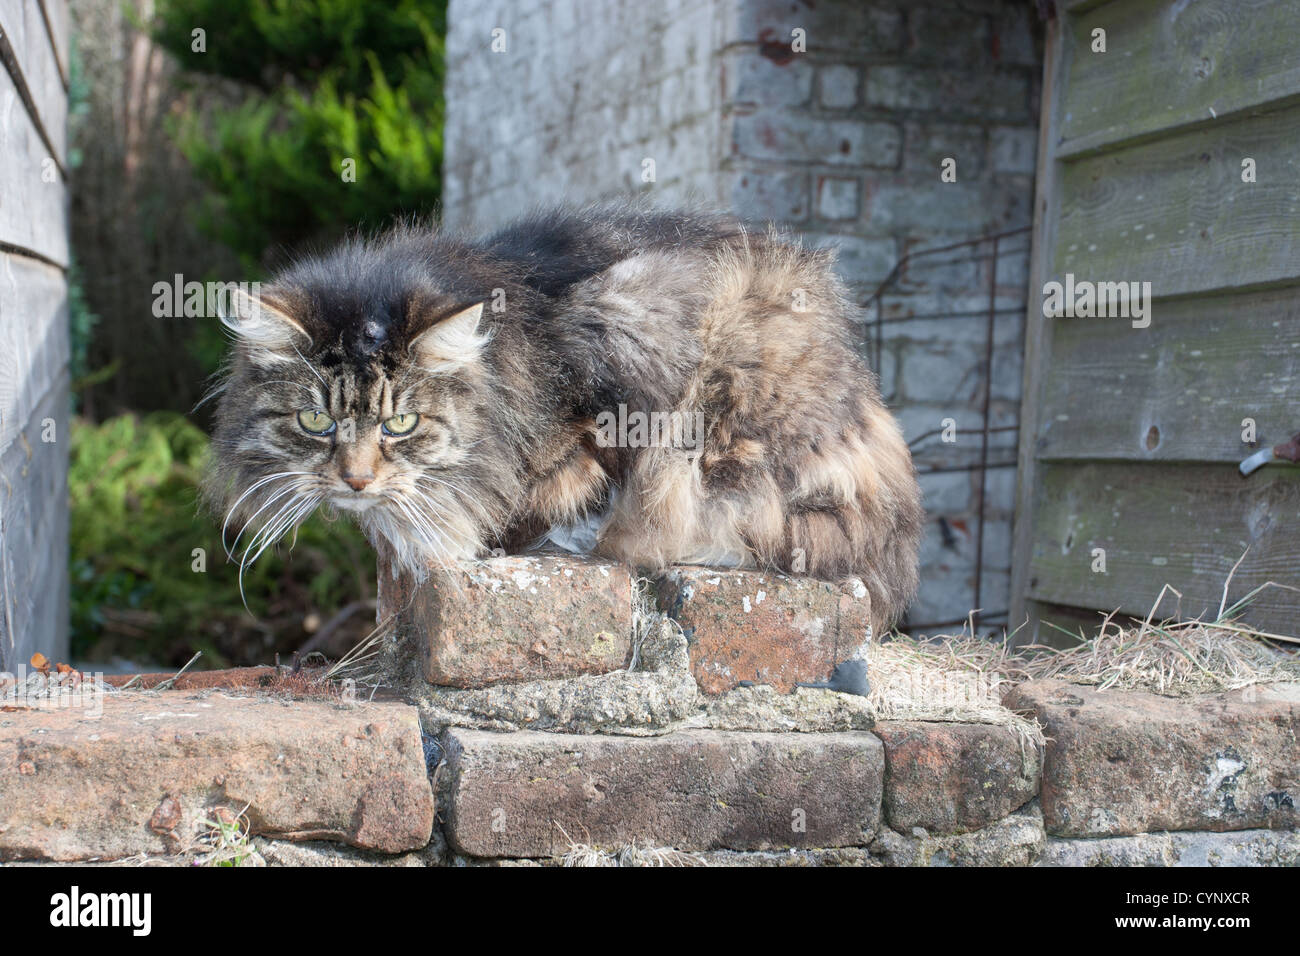 gmle2109 6101 Feral cat sitting on a wall looking at the camera Stock Photo